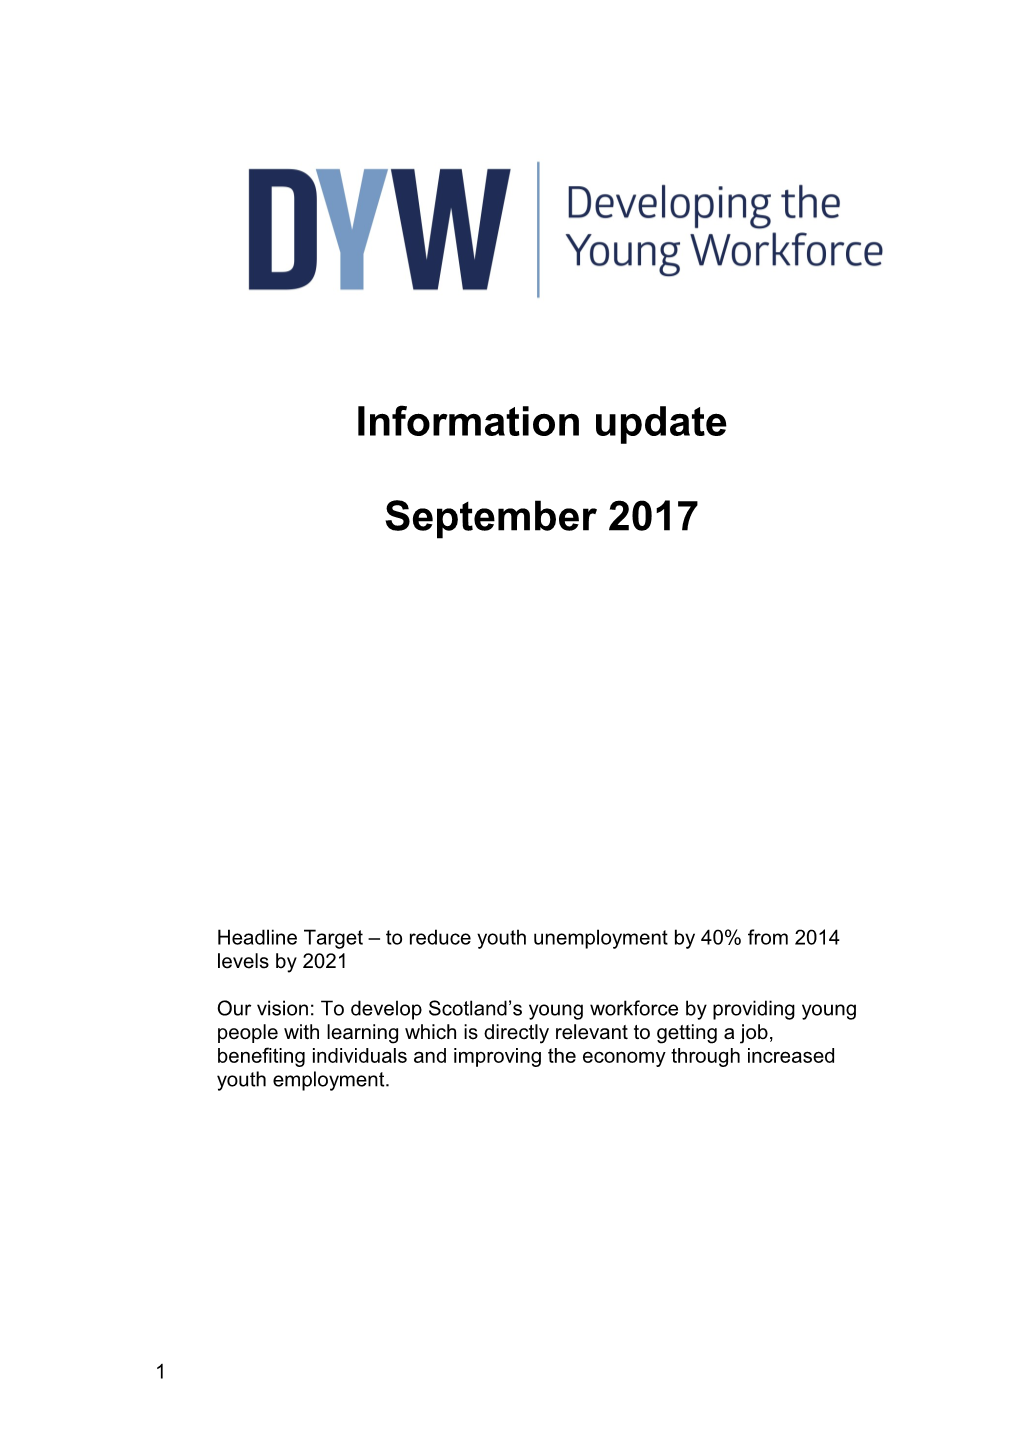 Word File: DYW Information Update - September 2017